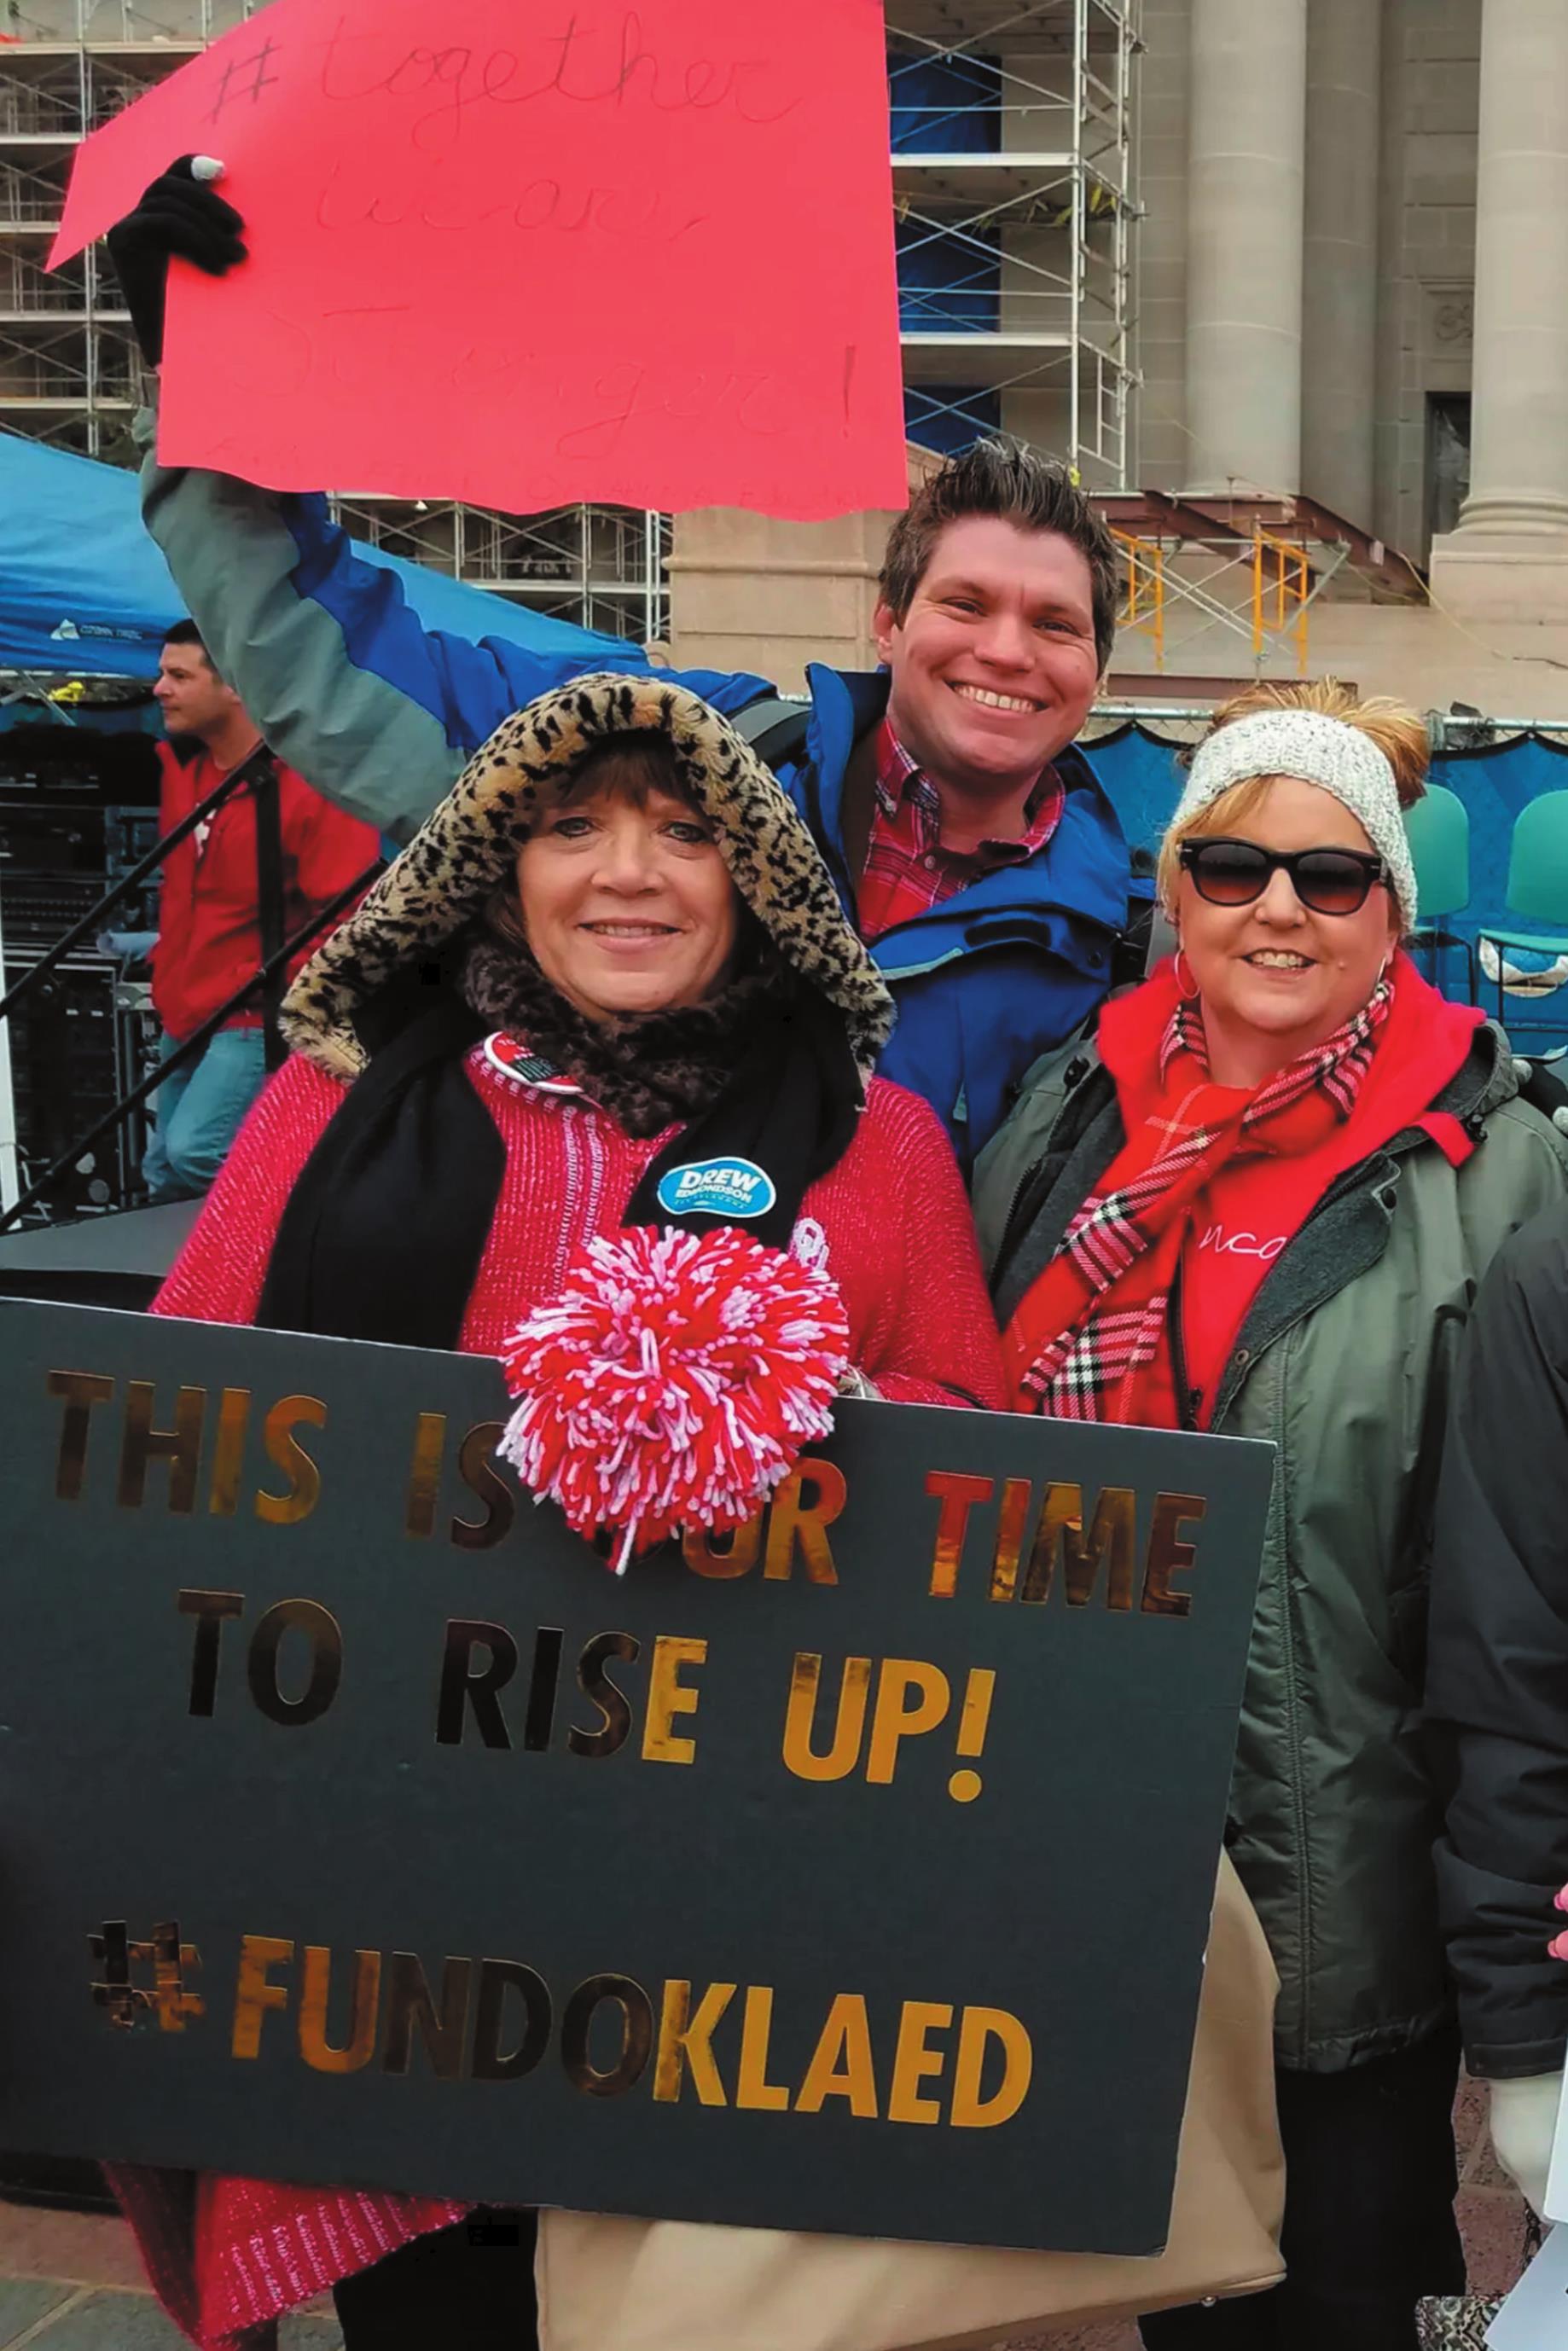 Duncan educators, from left, Cathy Barker, Derrick Miller and Sonia Norton at the Oklahoma teacher walkout in 2018. Provided